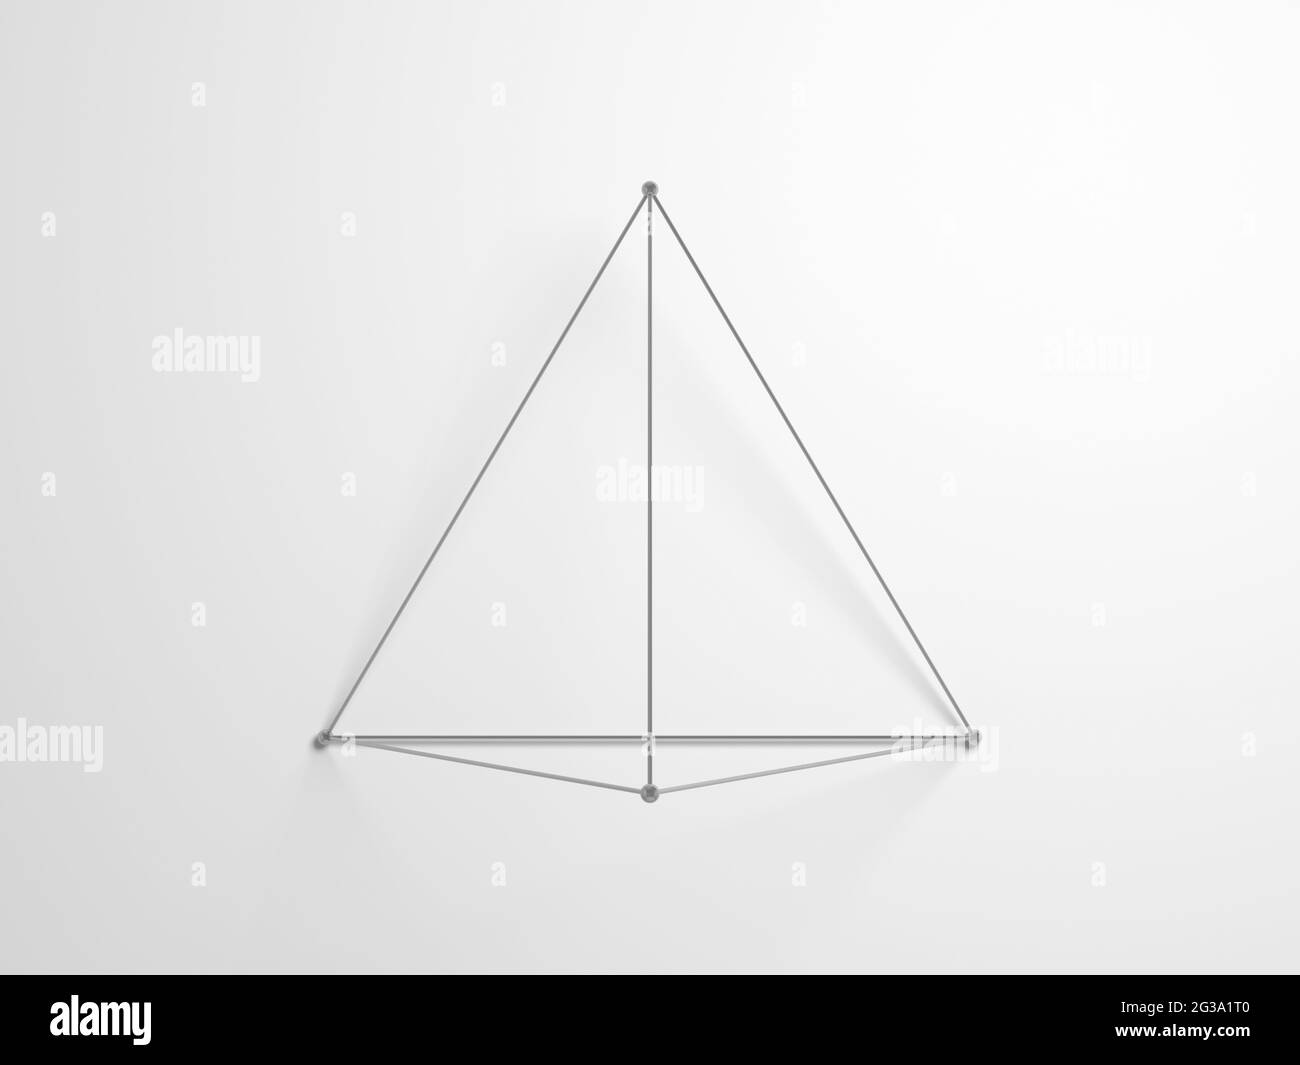 Regular tetrahedron. Lattice wire-frame geometric structure over white background with soft shadow, 3d rendering illustation Stock Photo